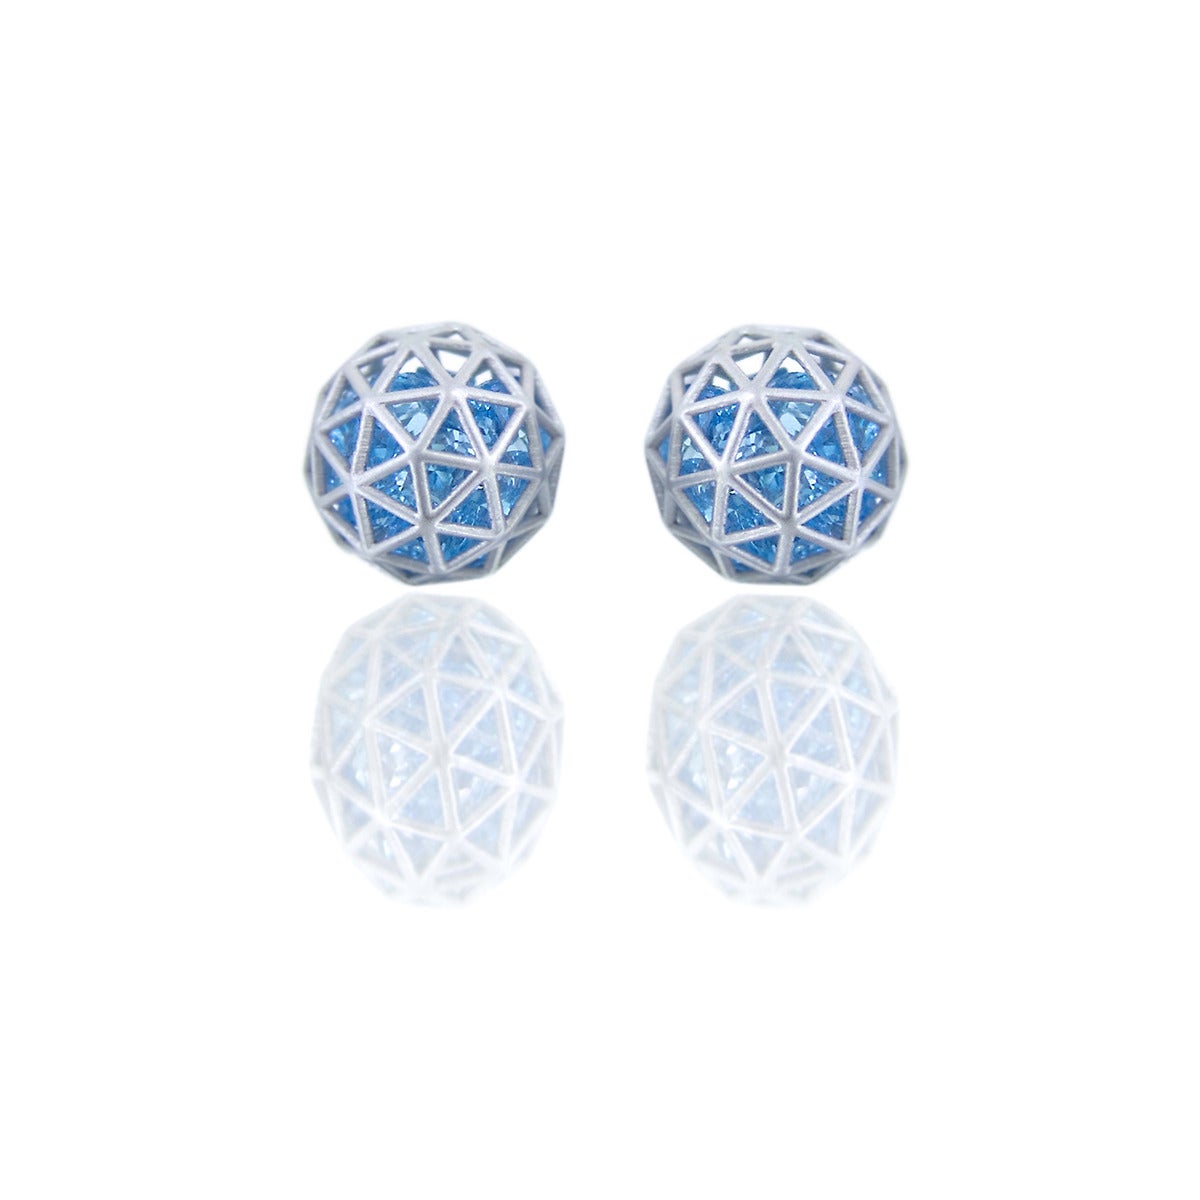 From the Wired Collection, stud earrings in 18k white gold with loose blue topaz (6 cts). Geodesic pattern, on posts. Diameter 9mm or approx 3/8